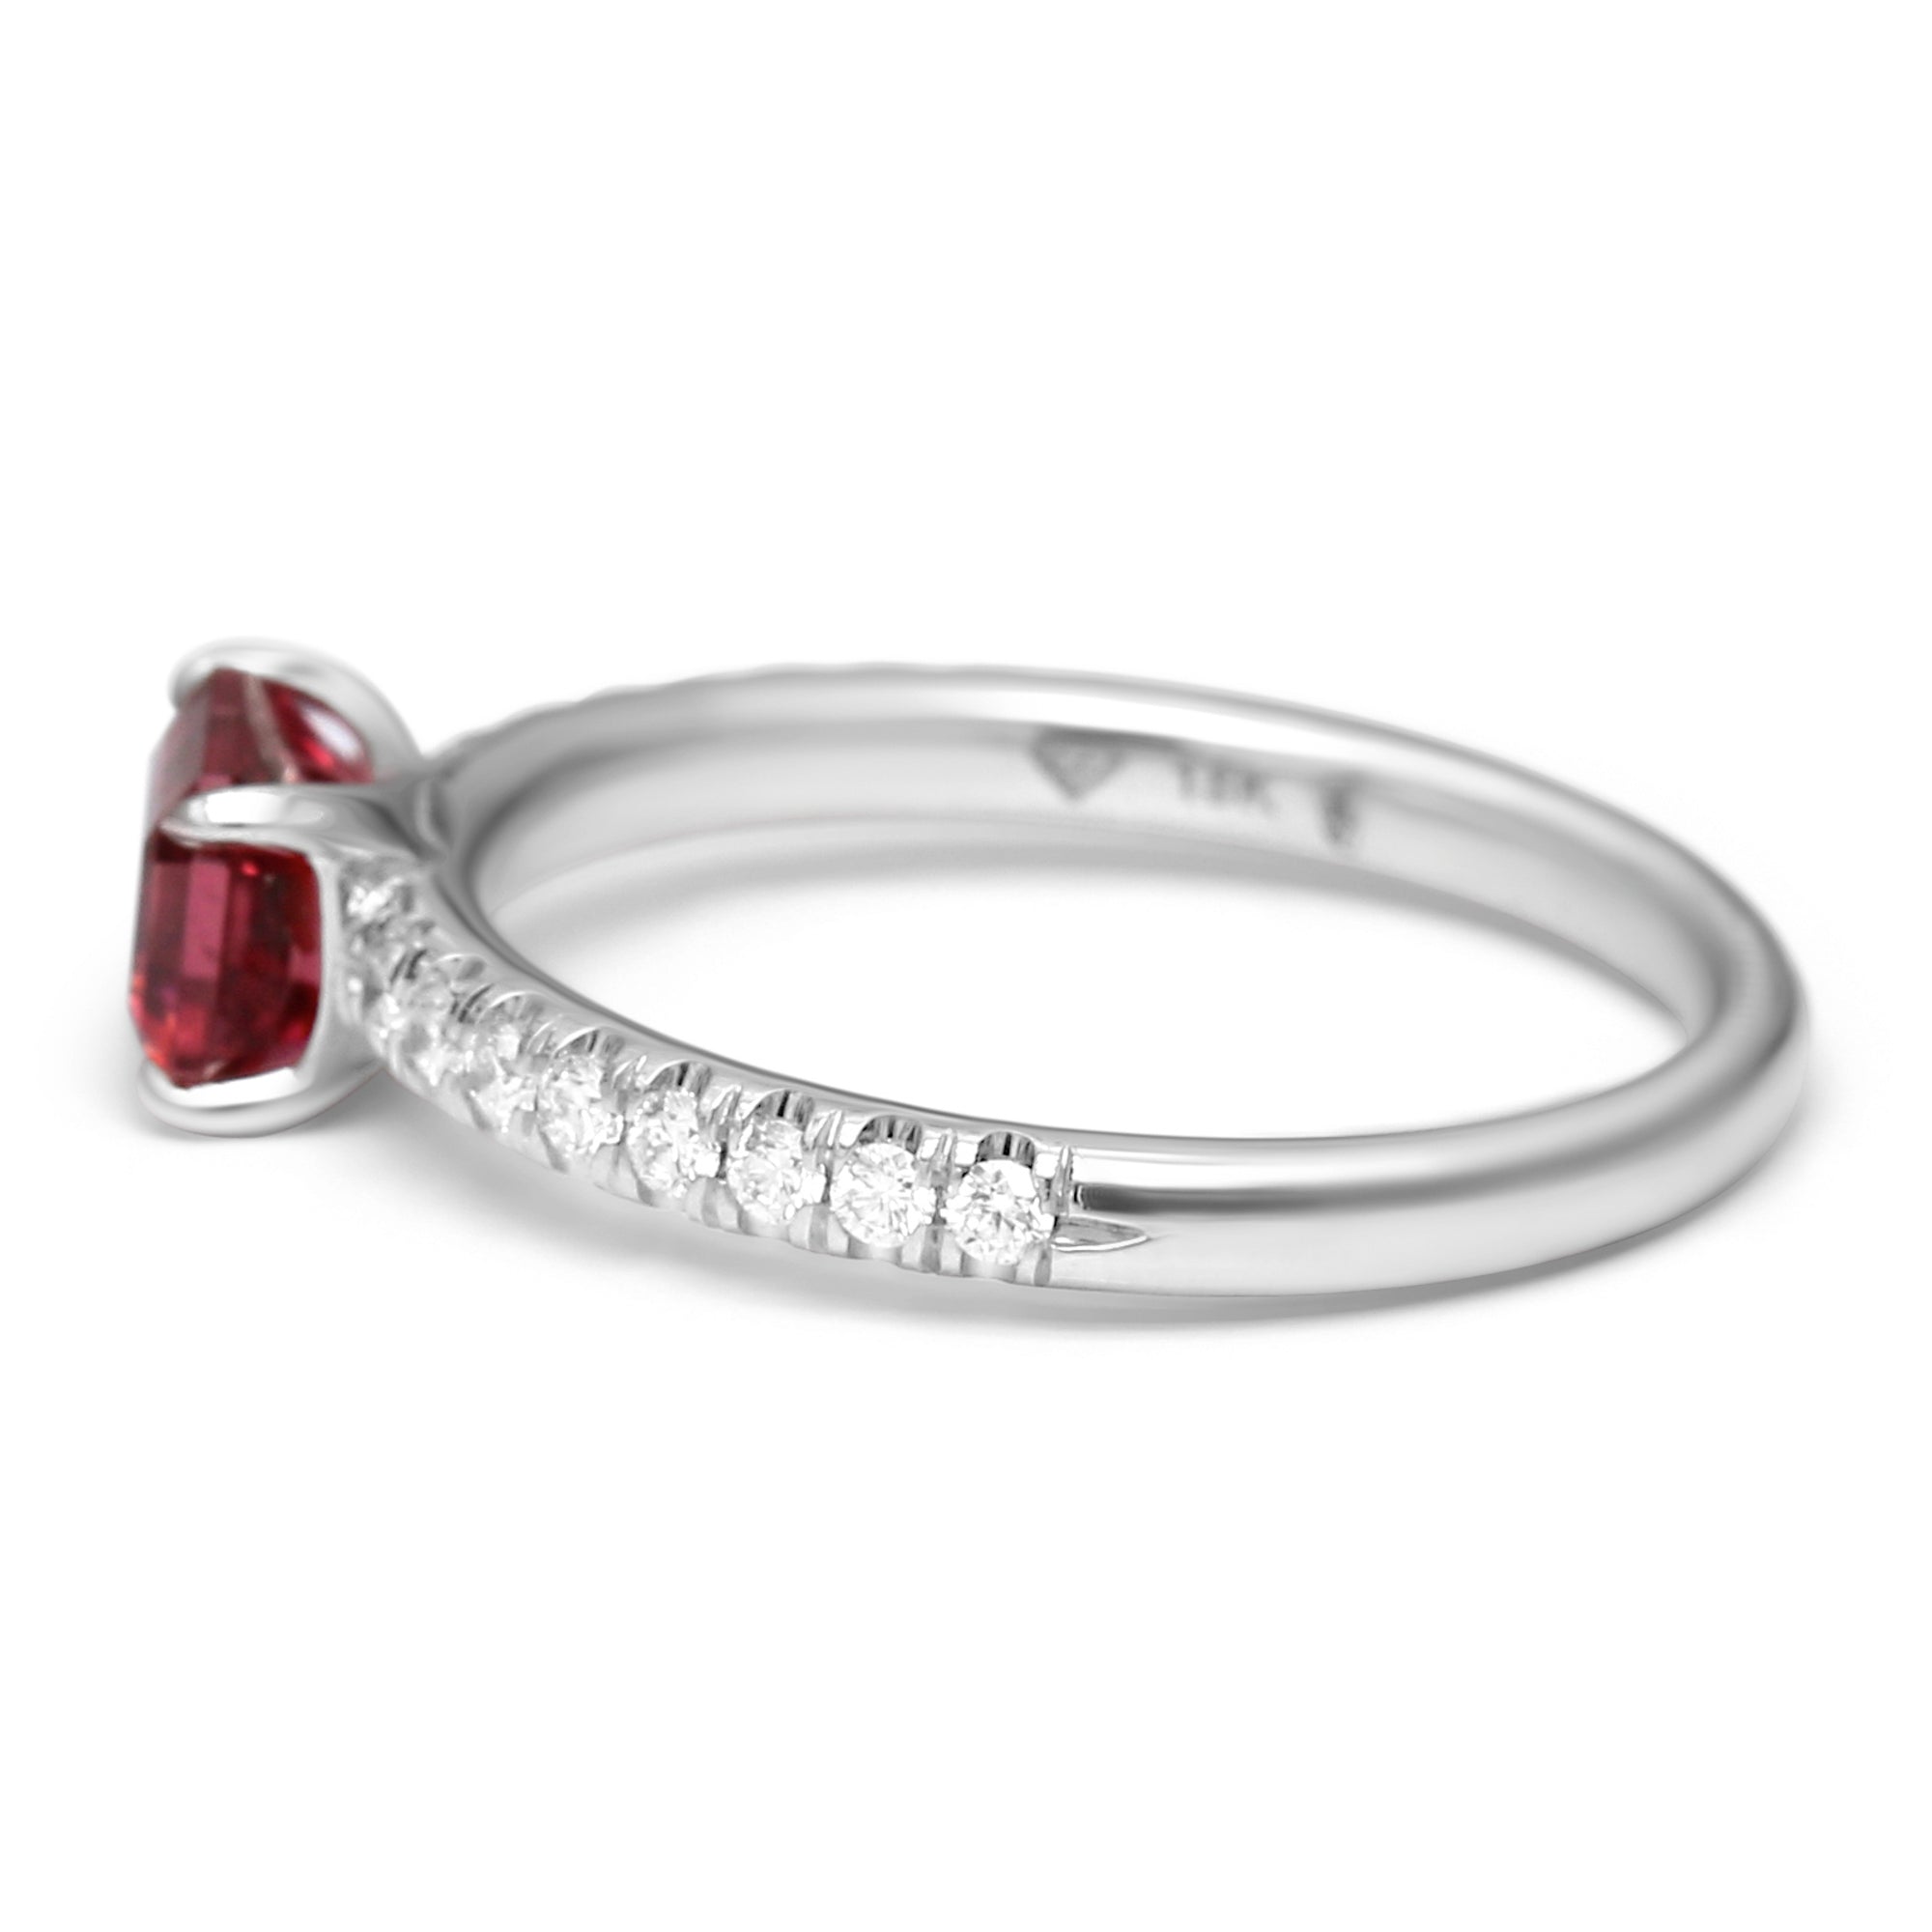 Rubellite East-West Ring with Diamonds -1.48ct TW